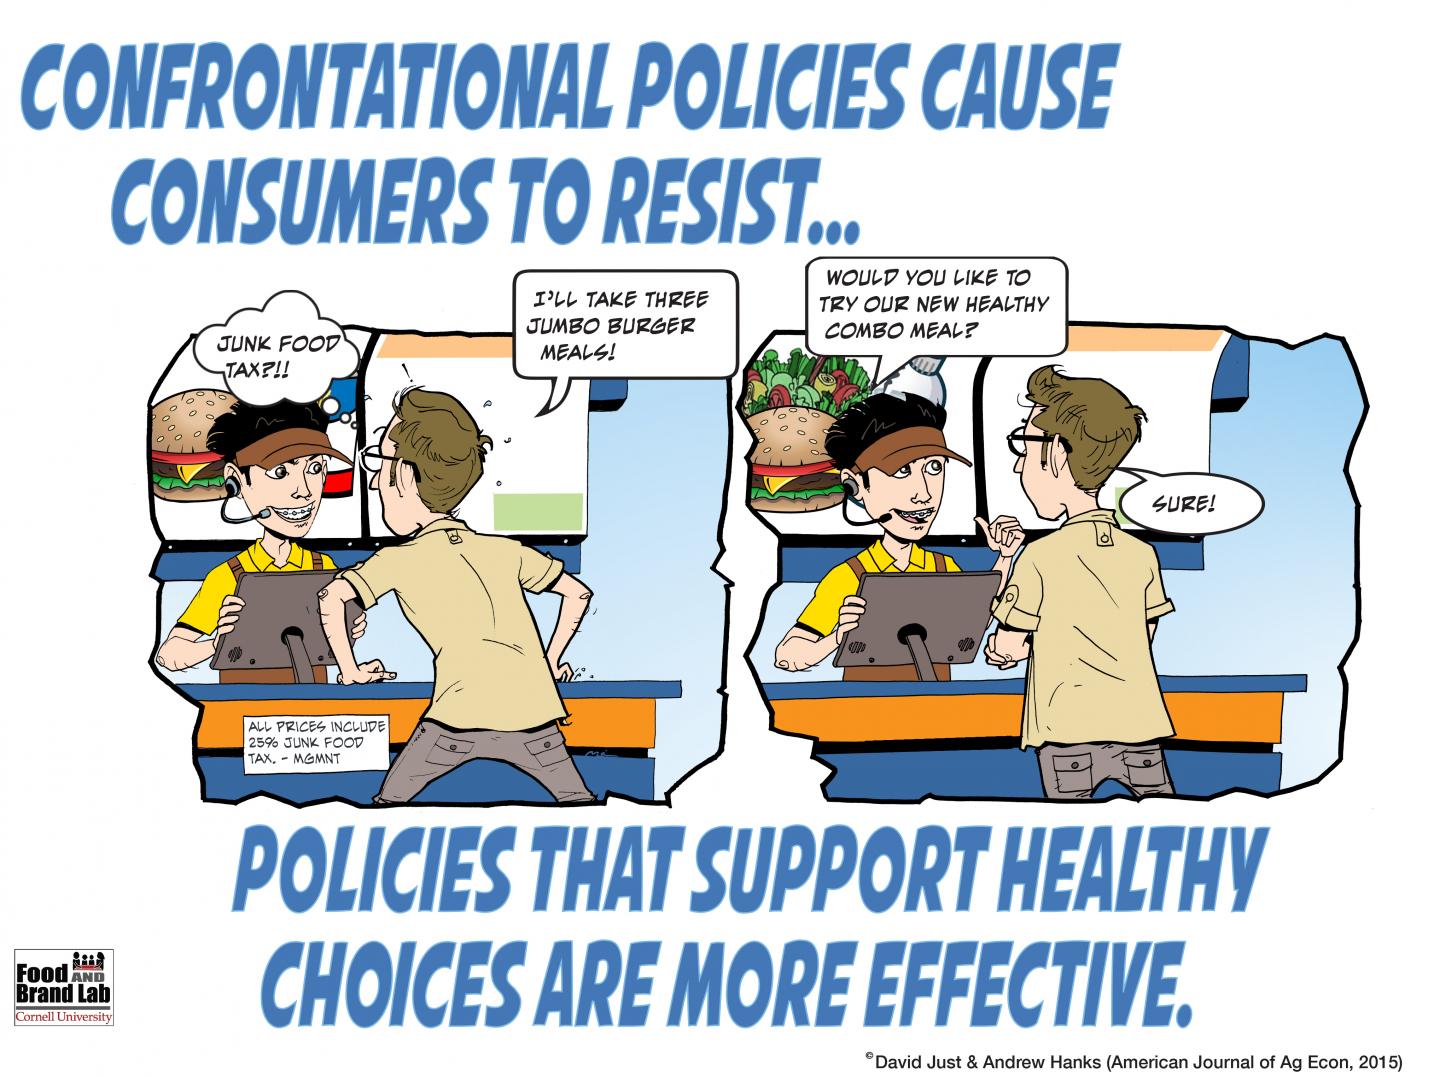 Confrontational Policies Cause Consumers to Resist